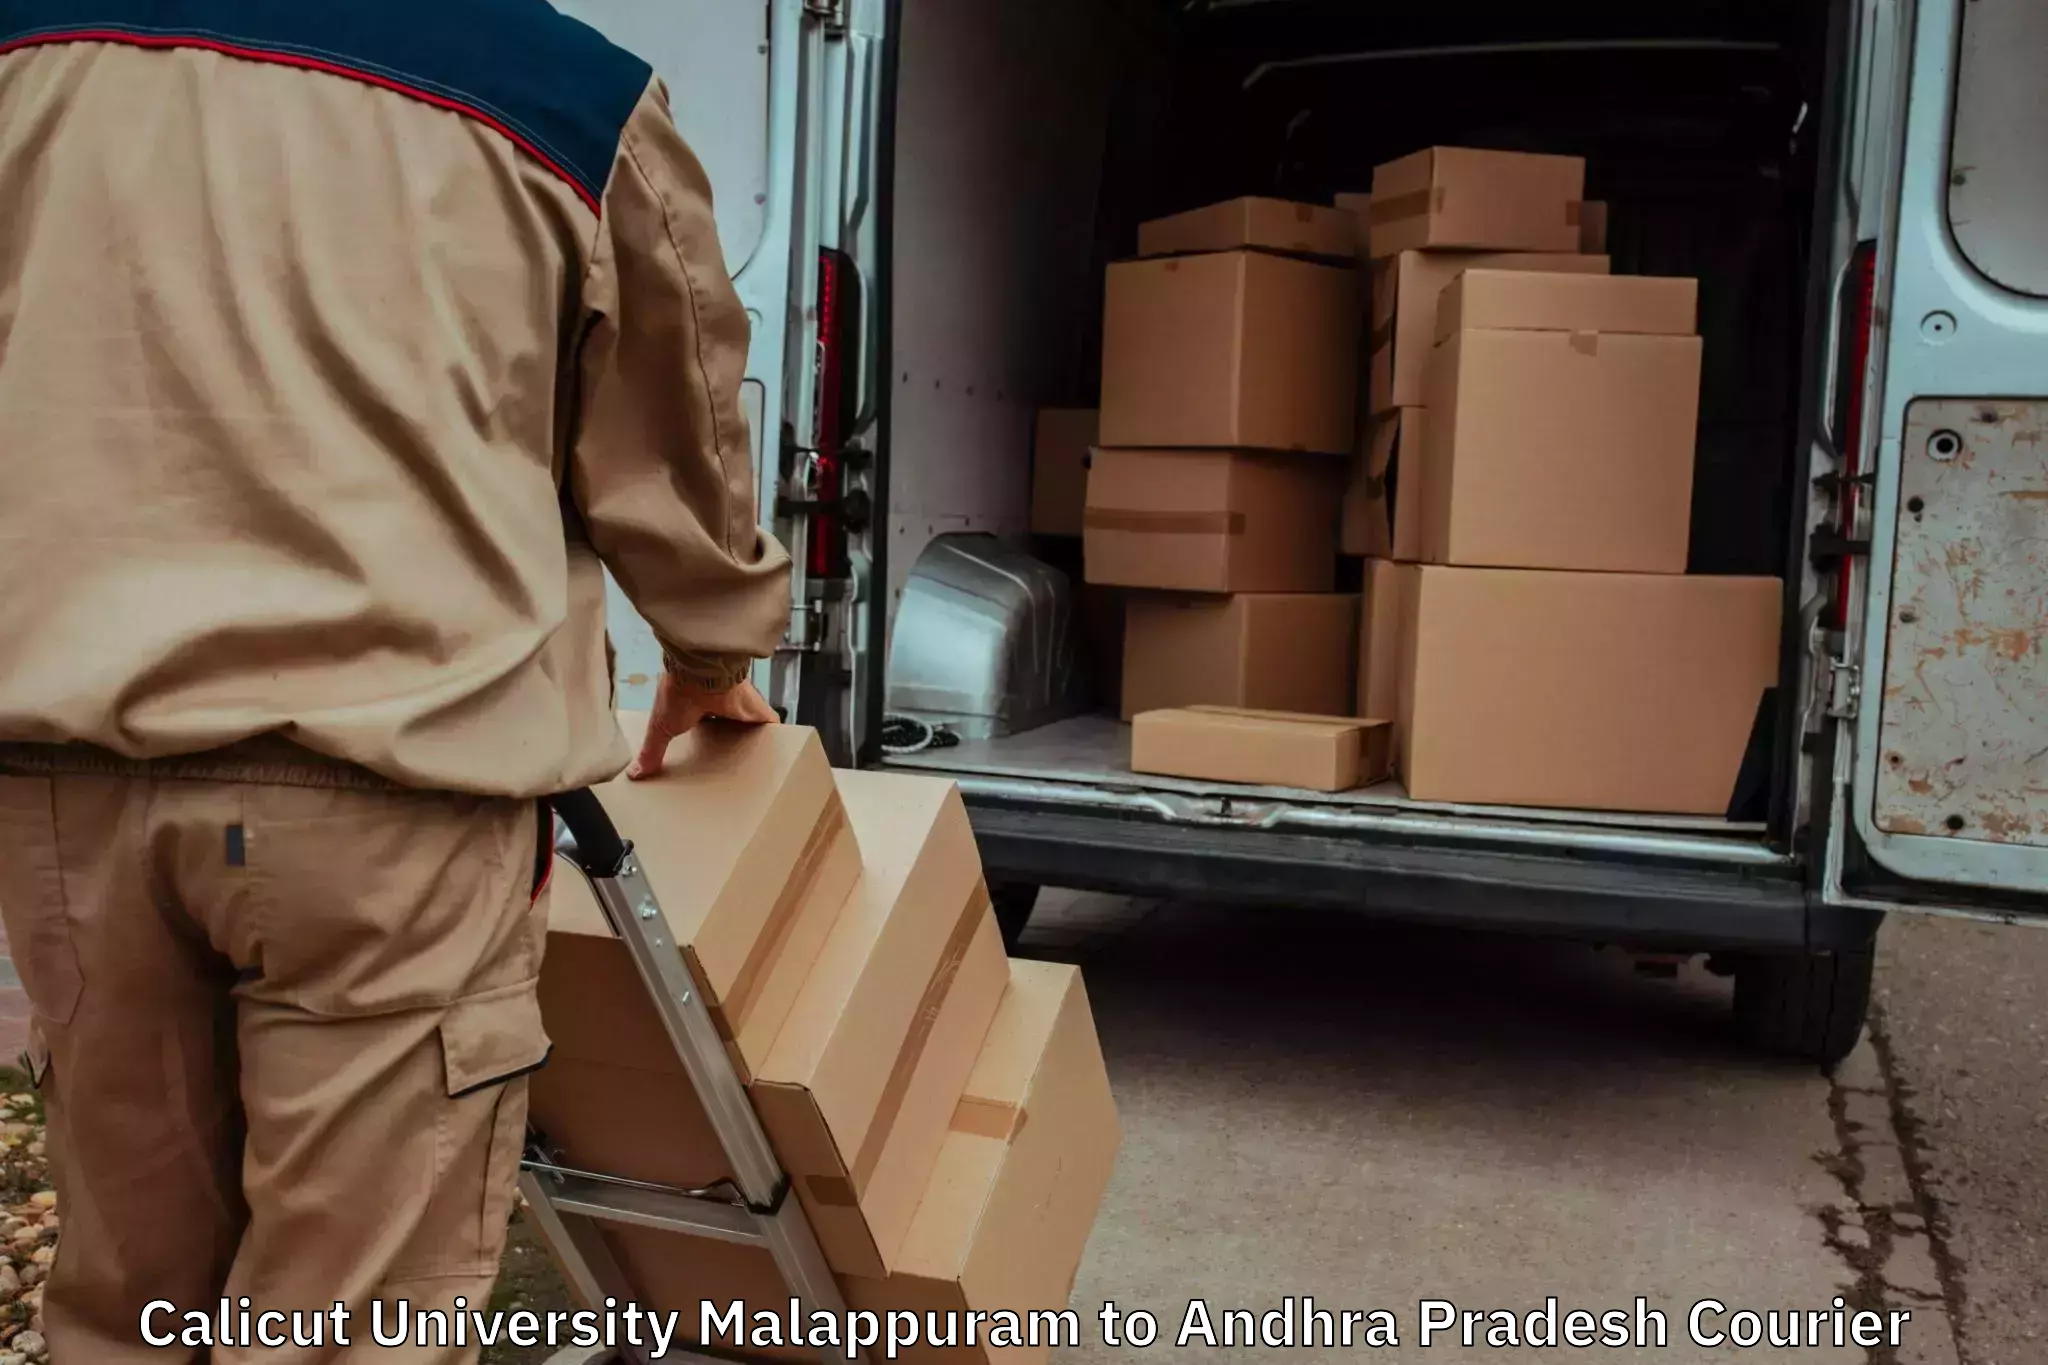 Efficient packing and moving Calicut University Malappuram to Nellore